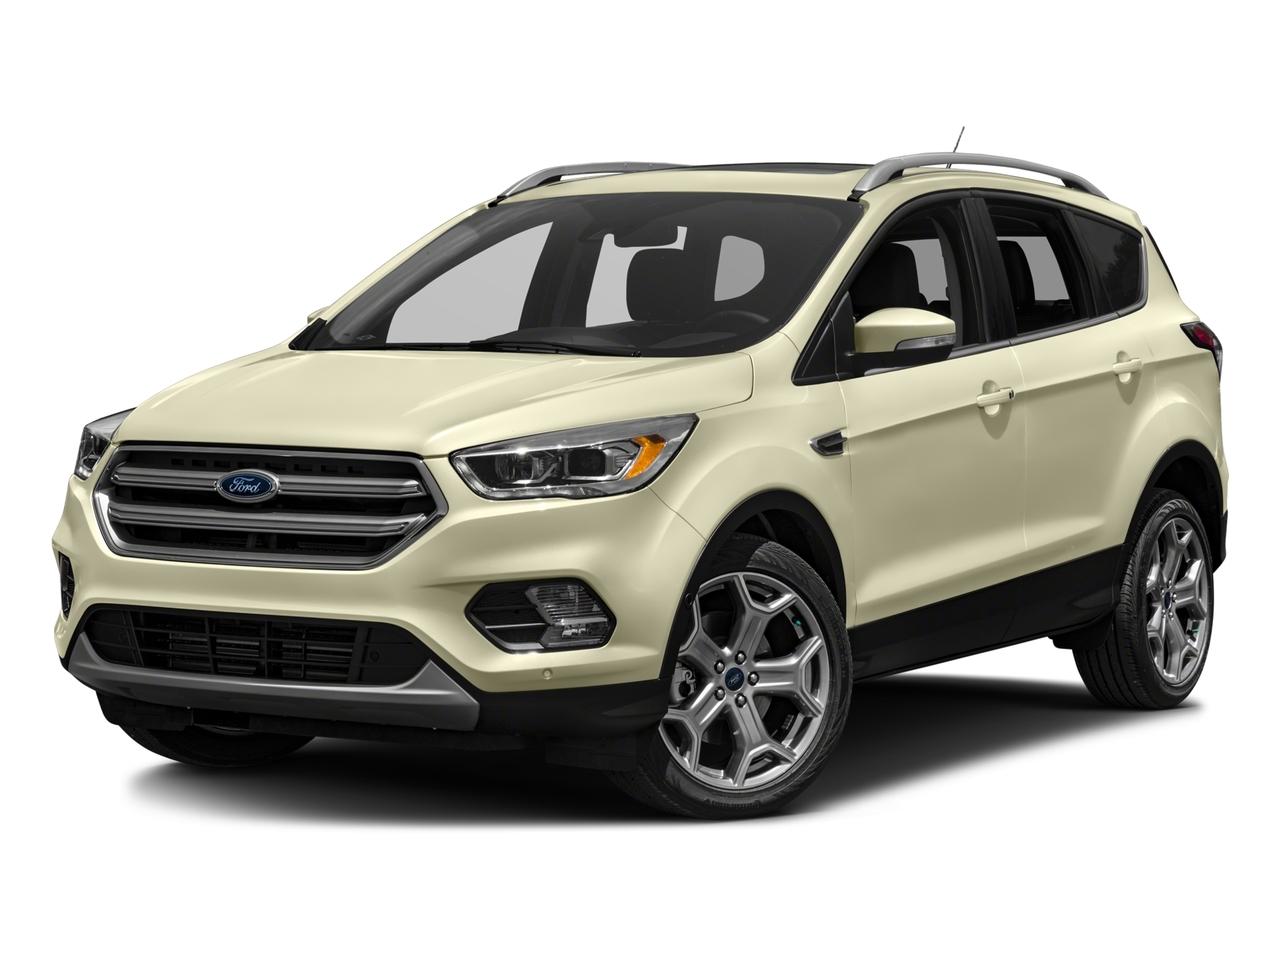 2017 Ford Escape Vehicle Photo in Saint Charles, IL 60174